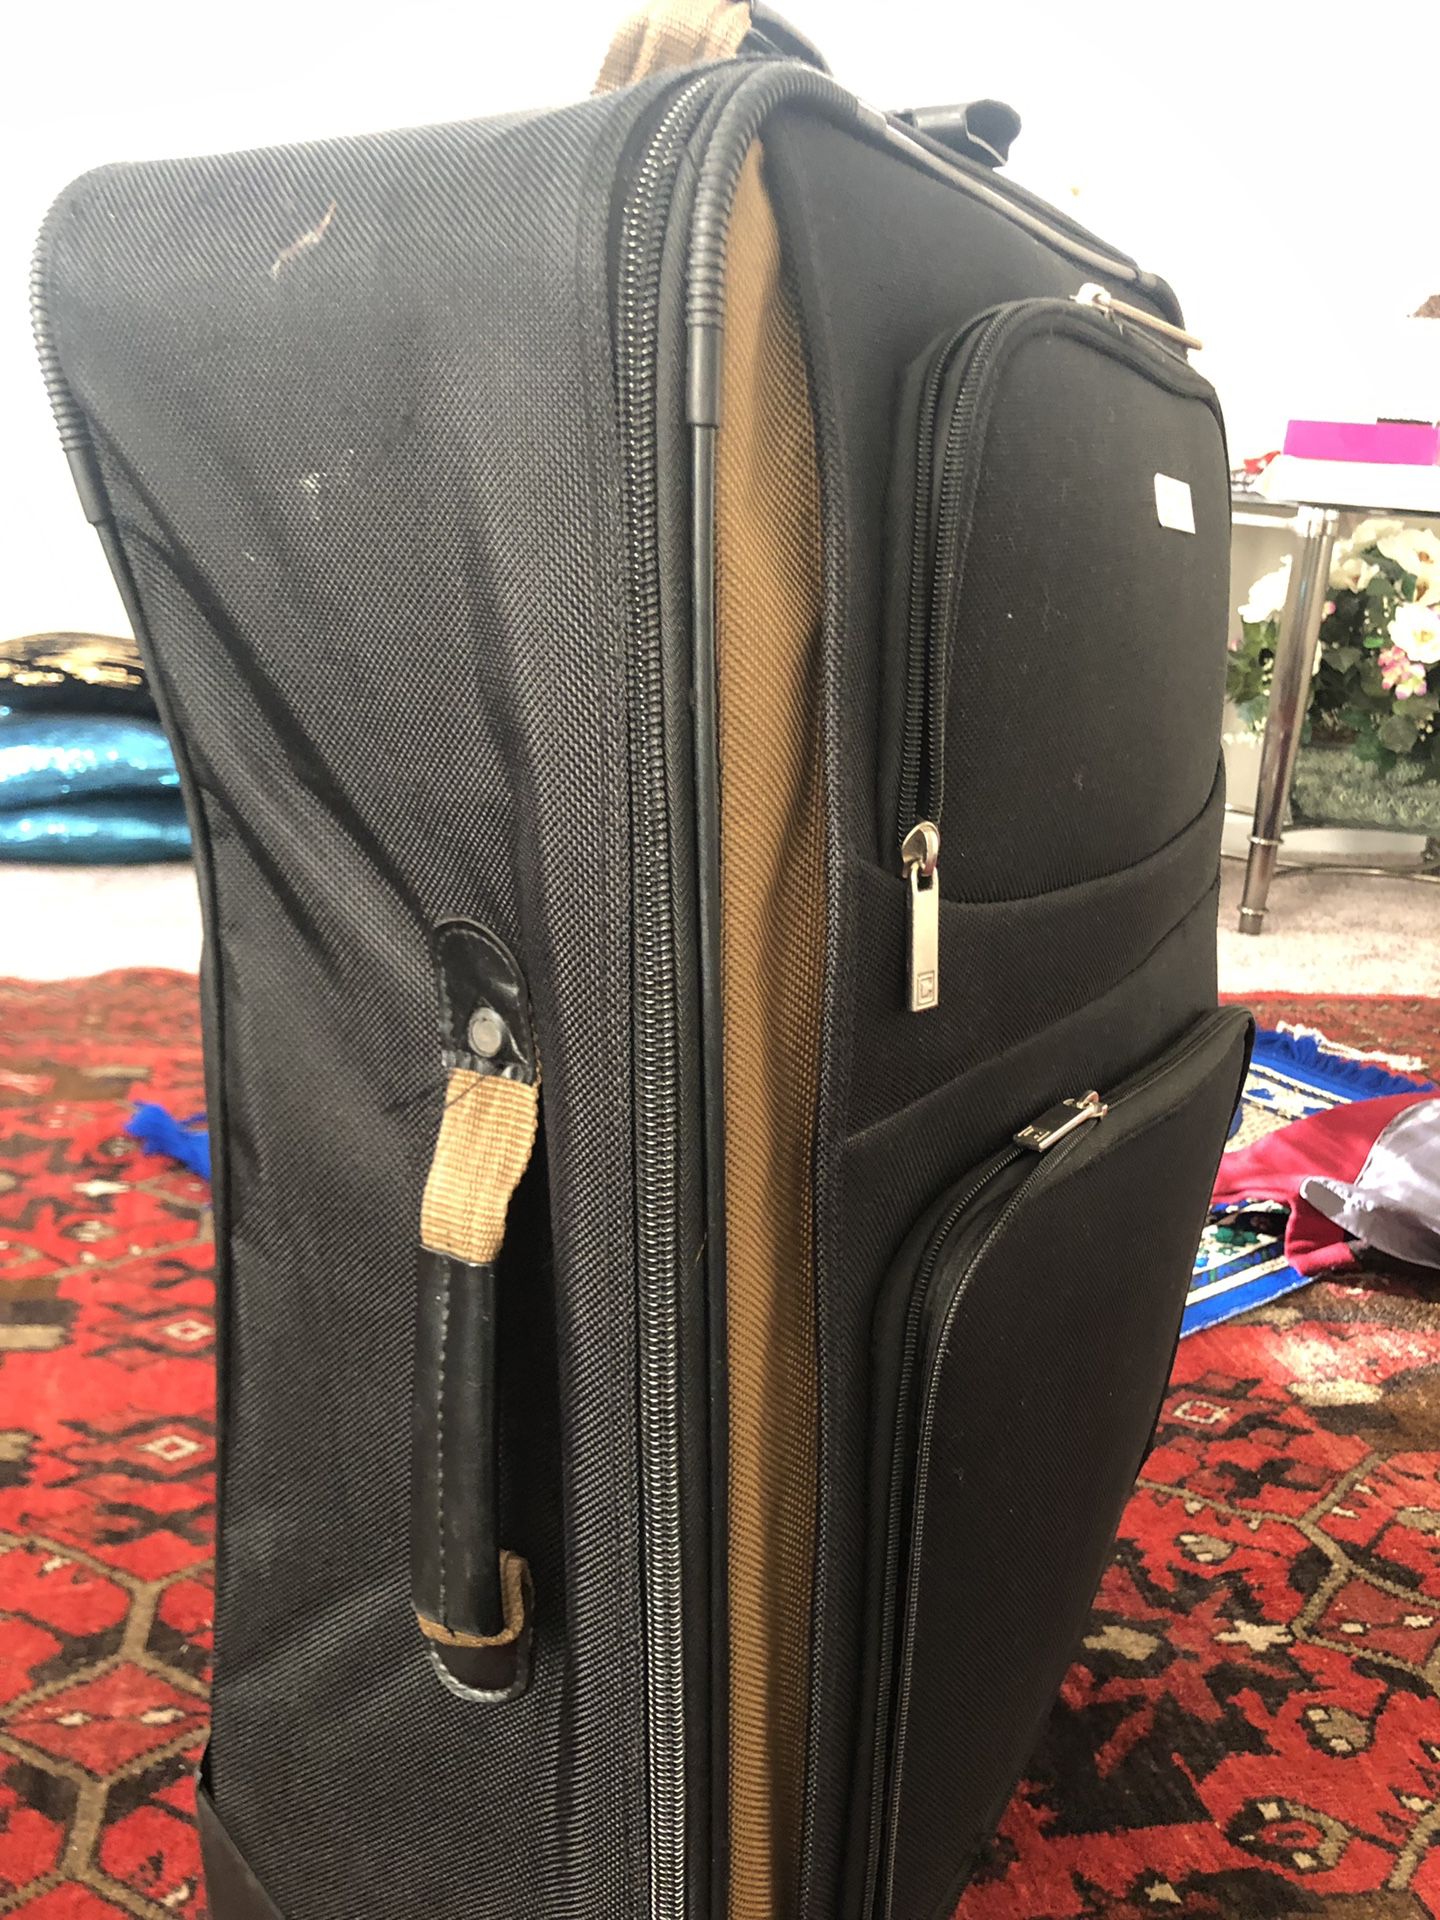 Suits case used chaps company I have four suits case 10 dollars each 2 small 2 big size 30 dollars 4